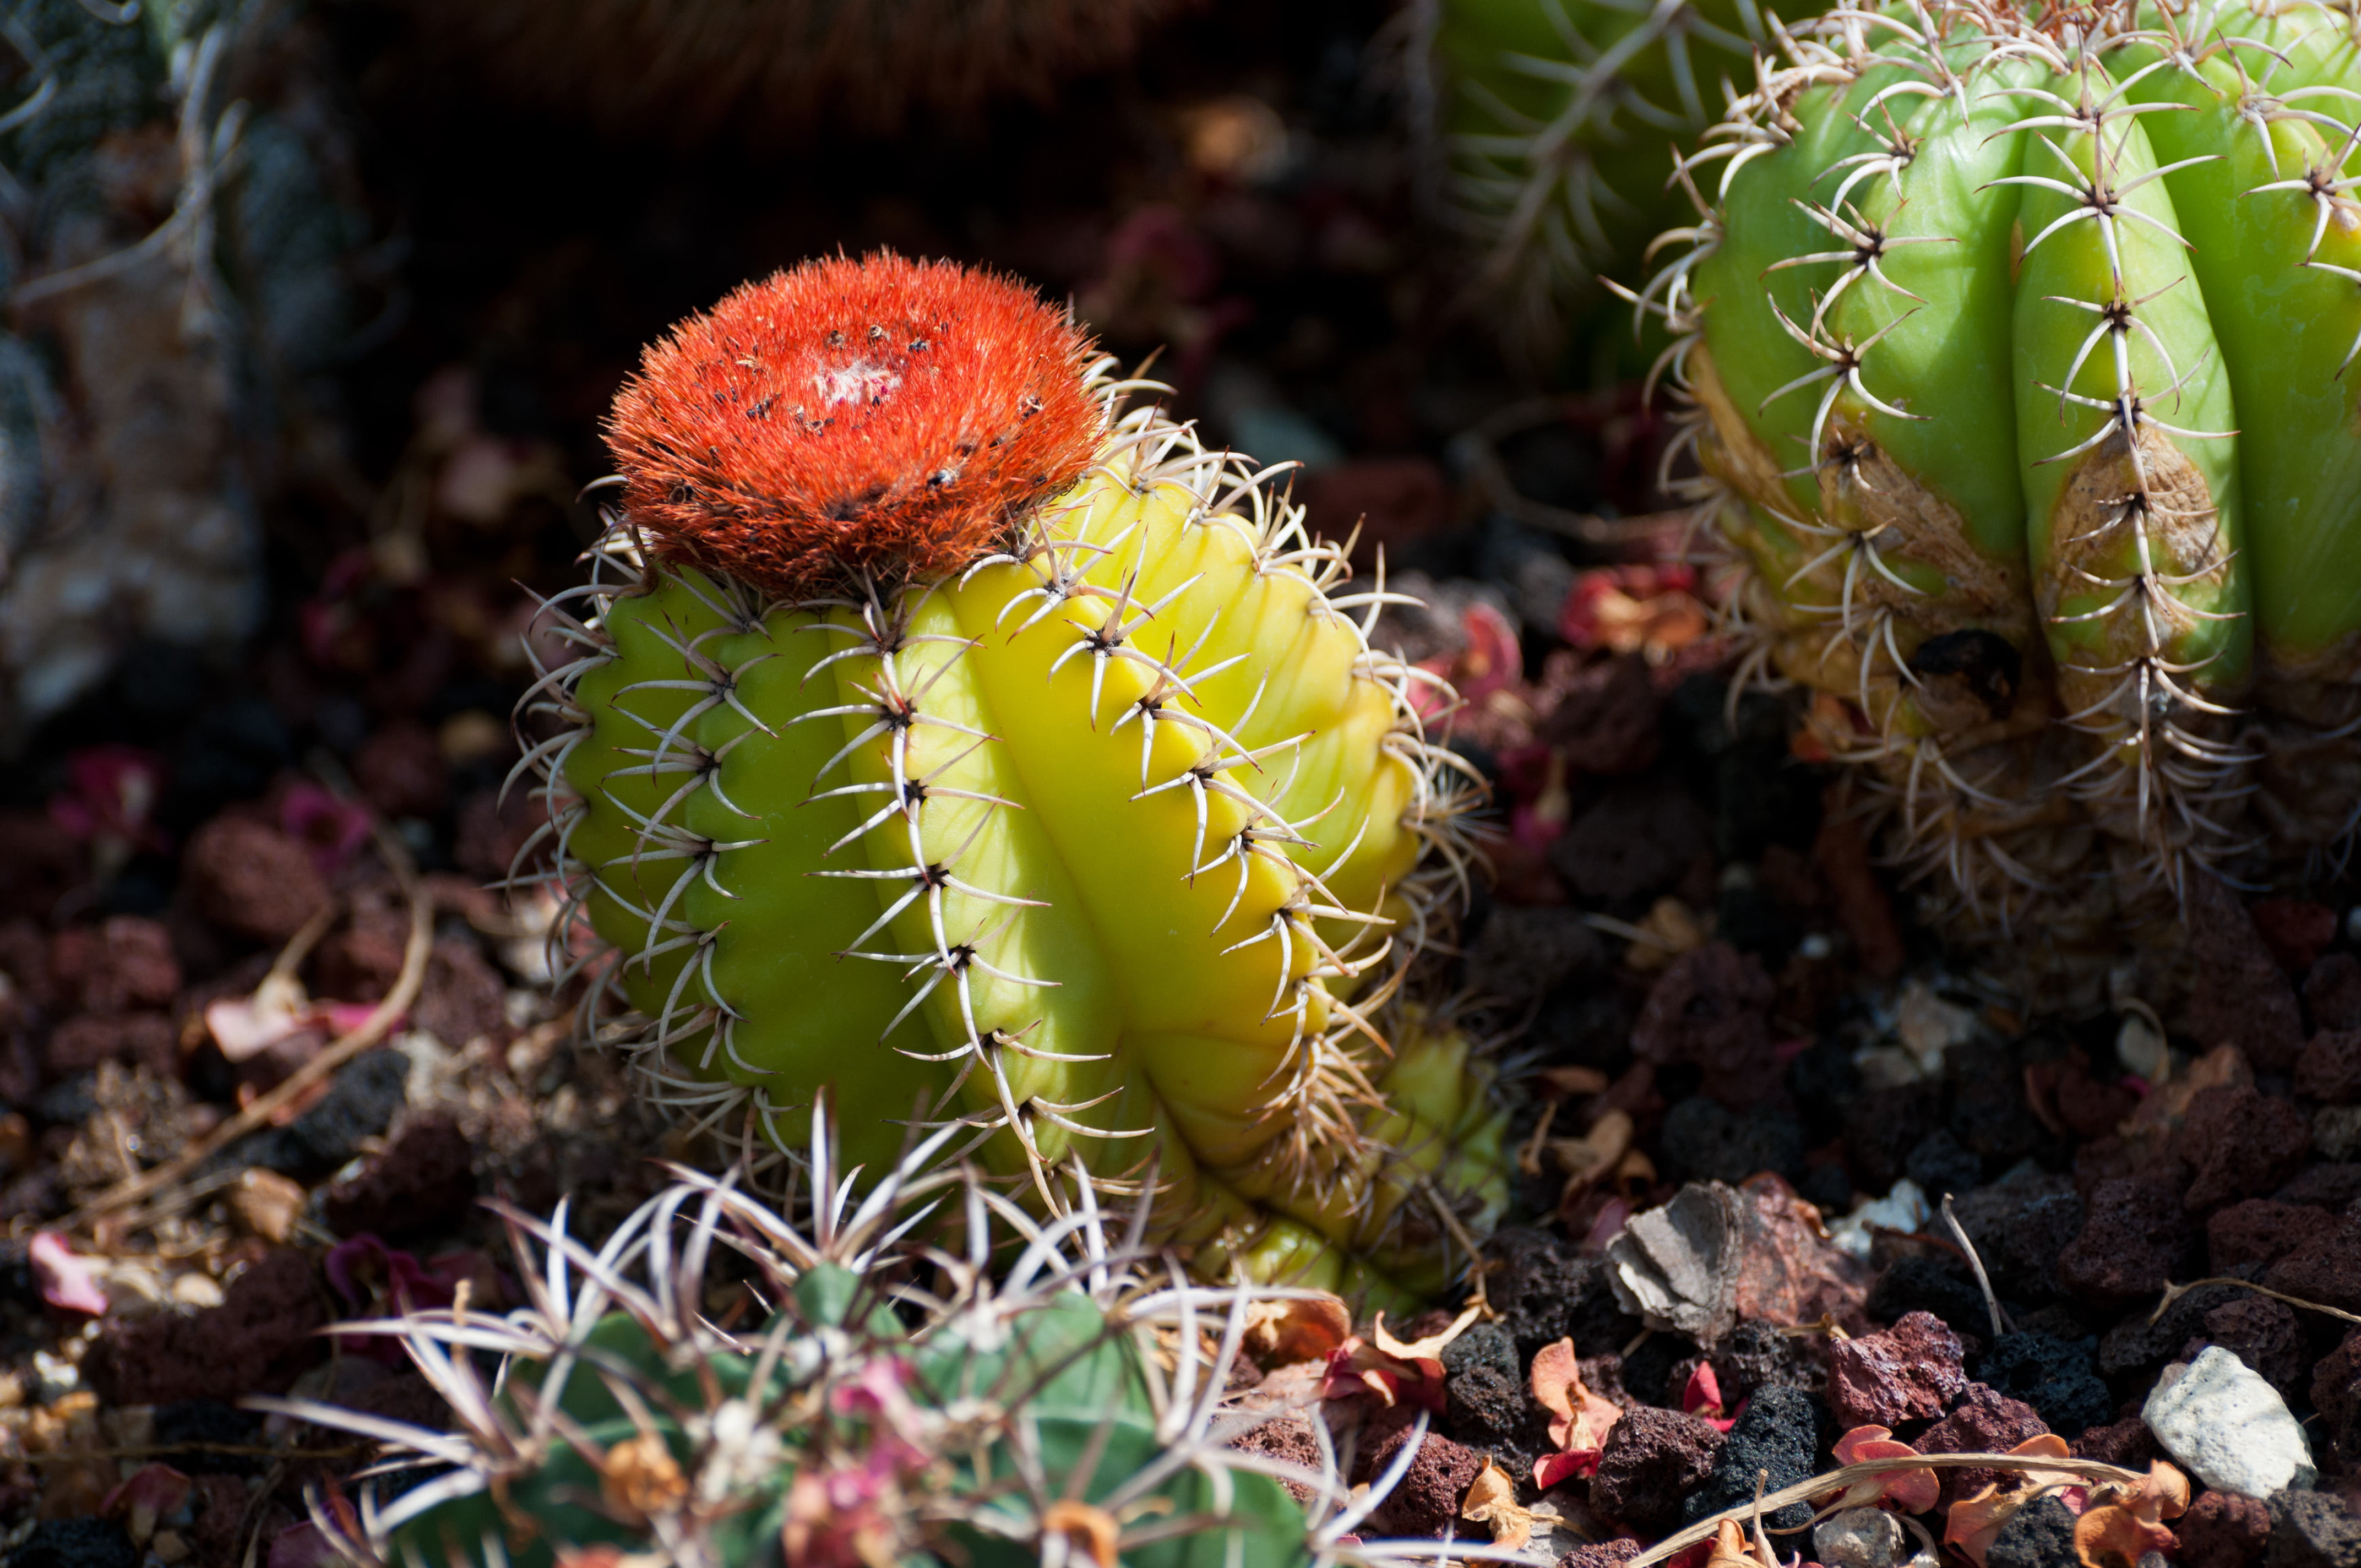 photo of green and red cactus plant, chicago botanic garden, nature